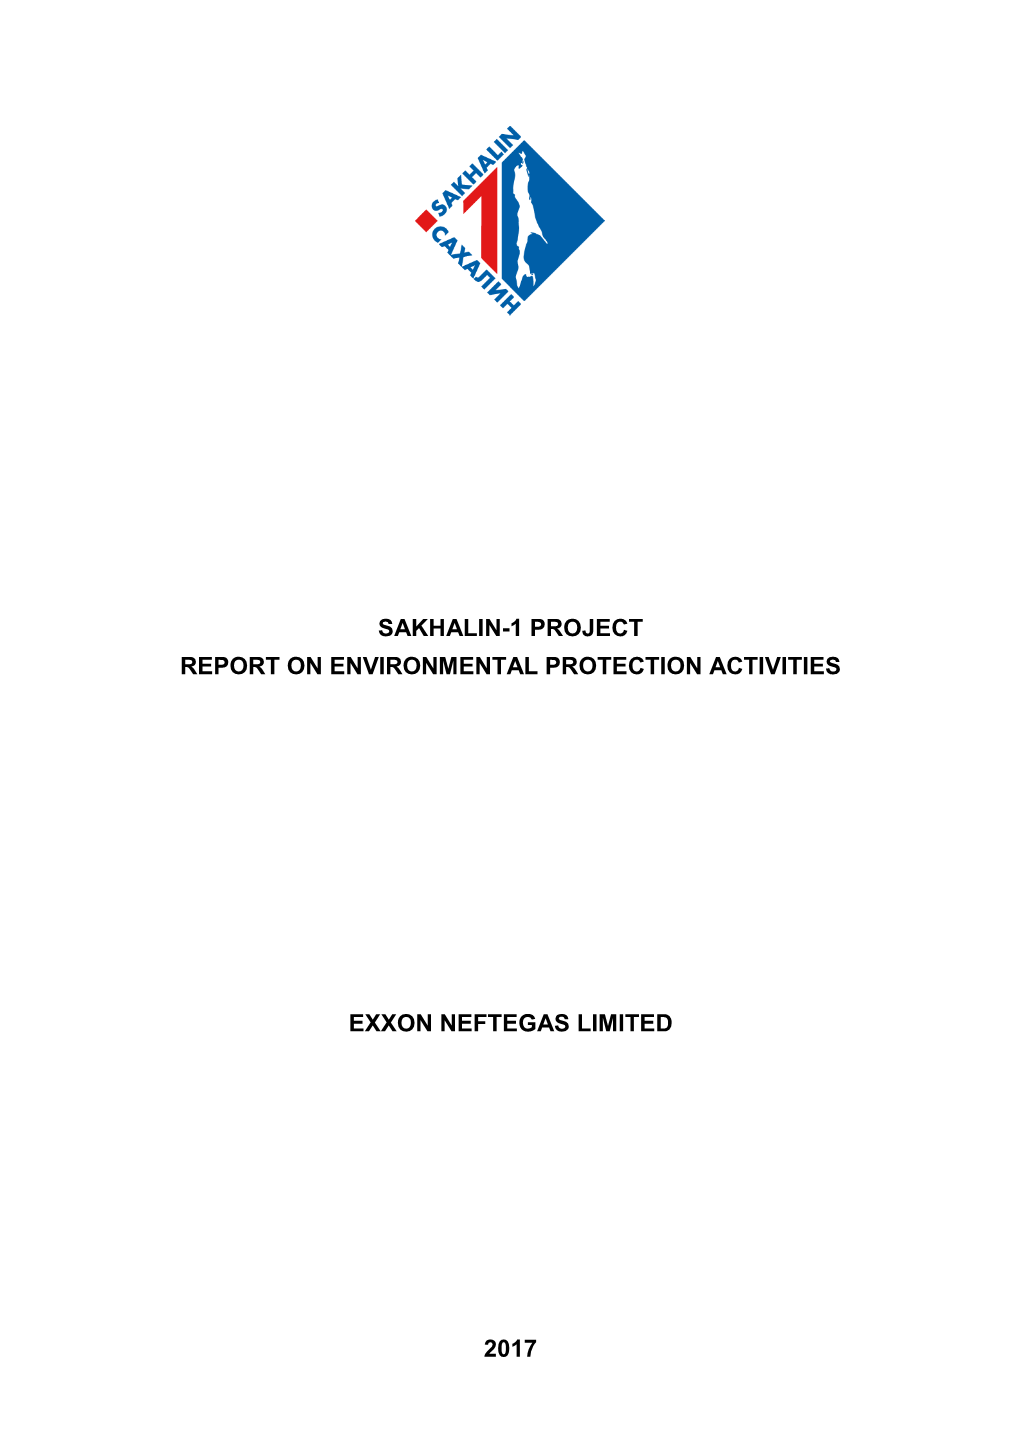 Sakhalin-1 Project Report on Environmental Protection Activities